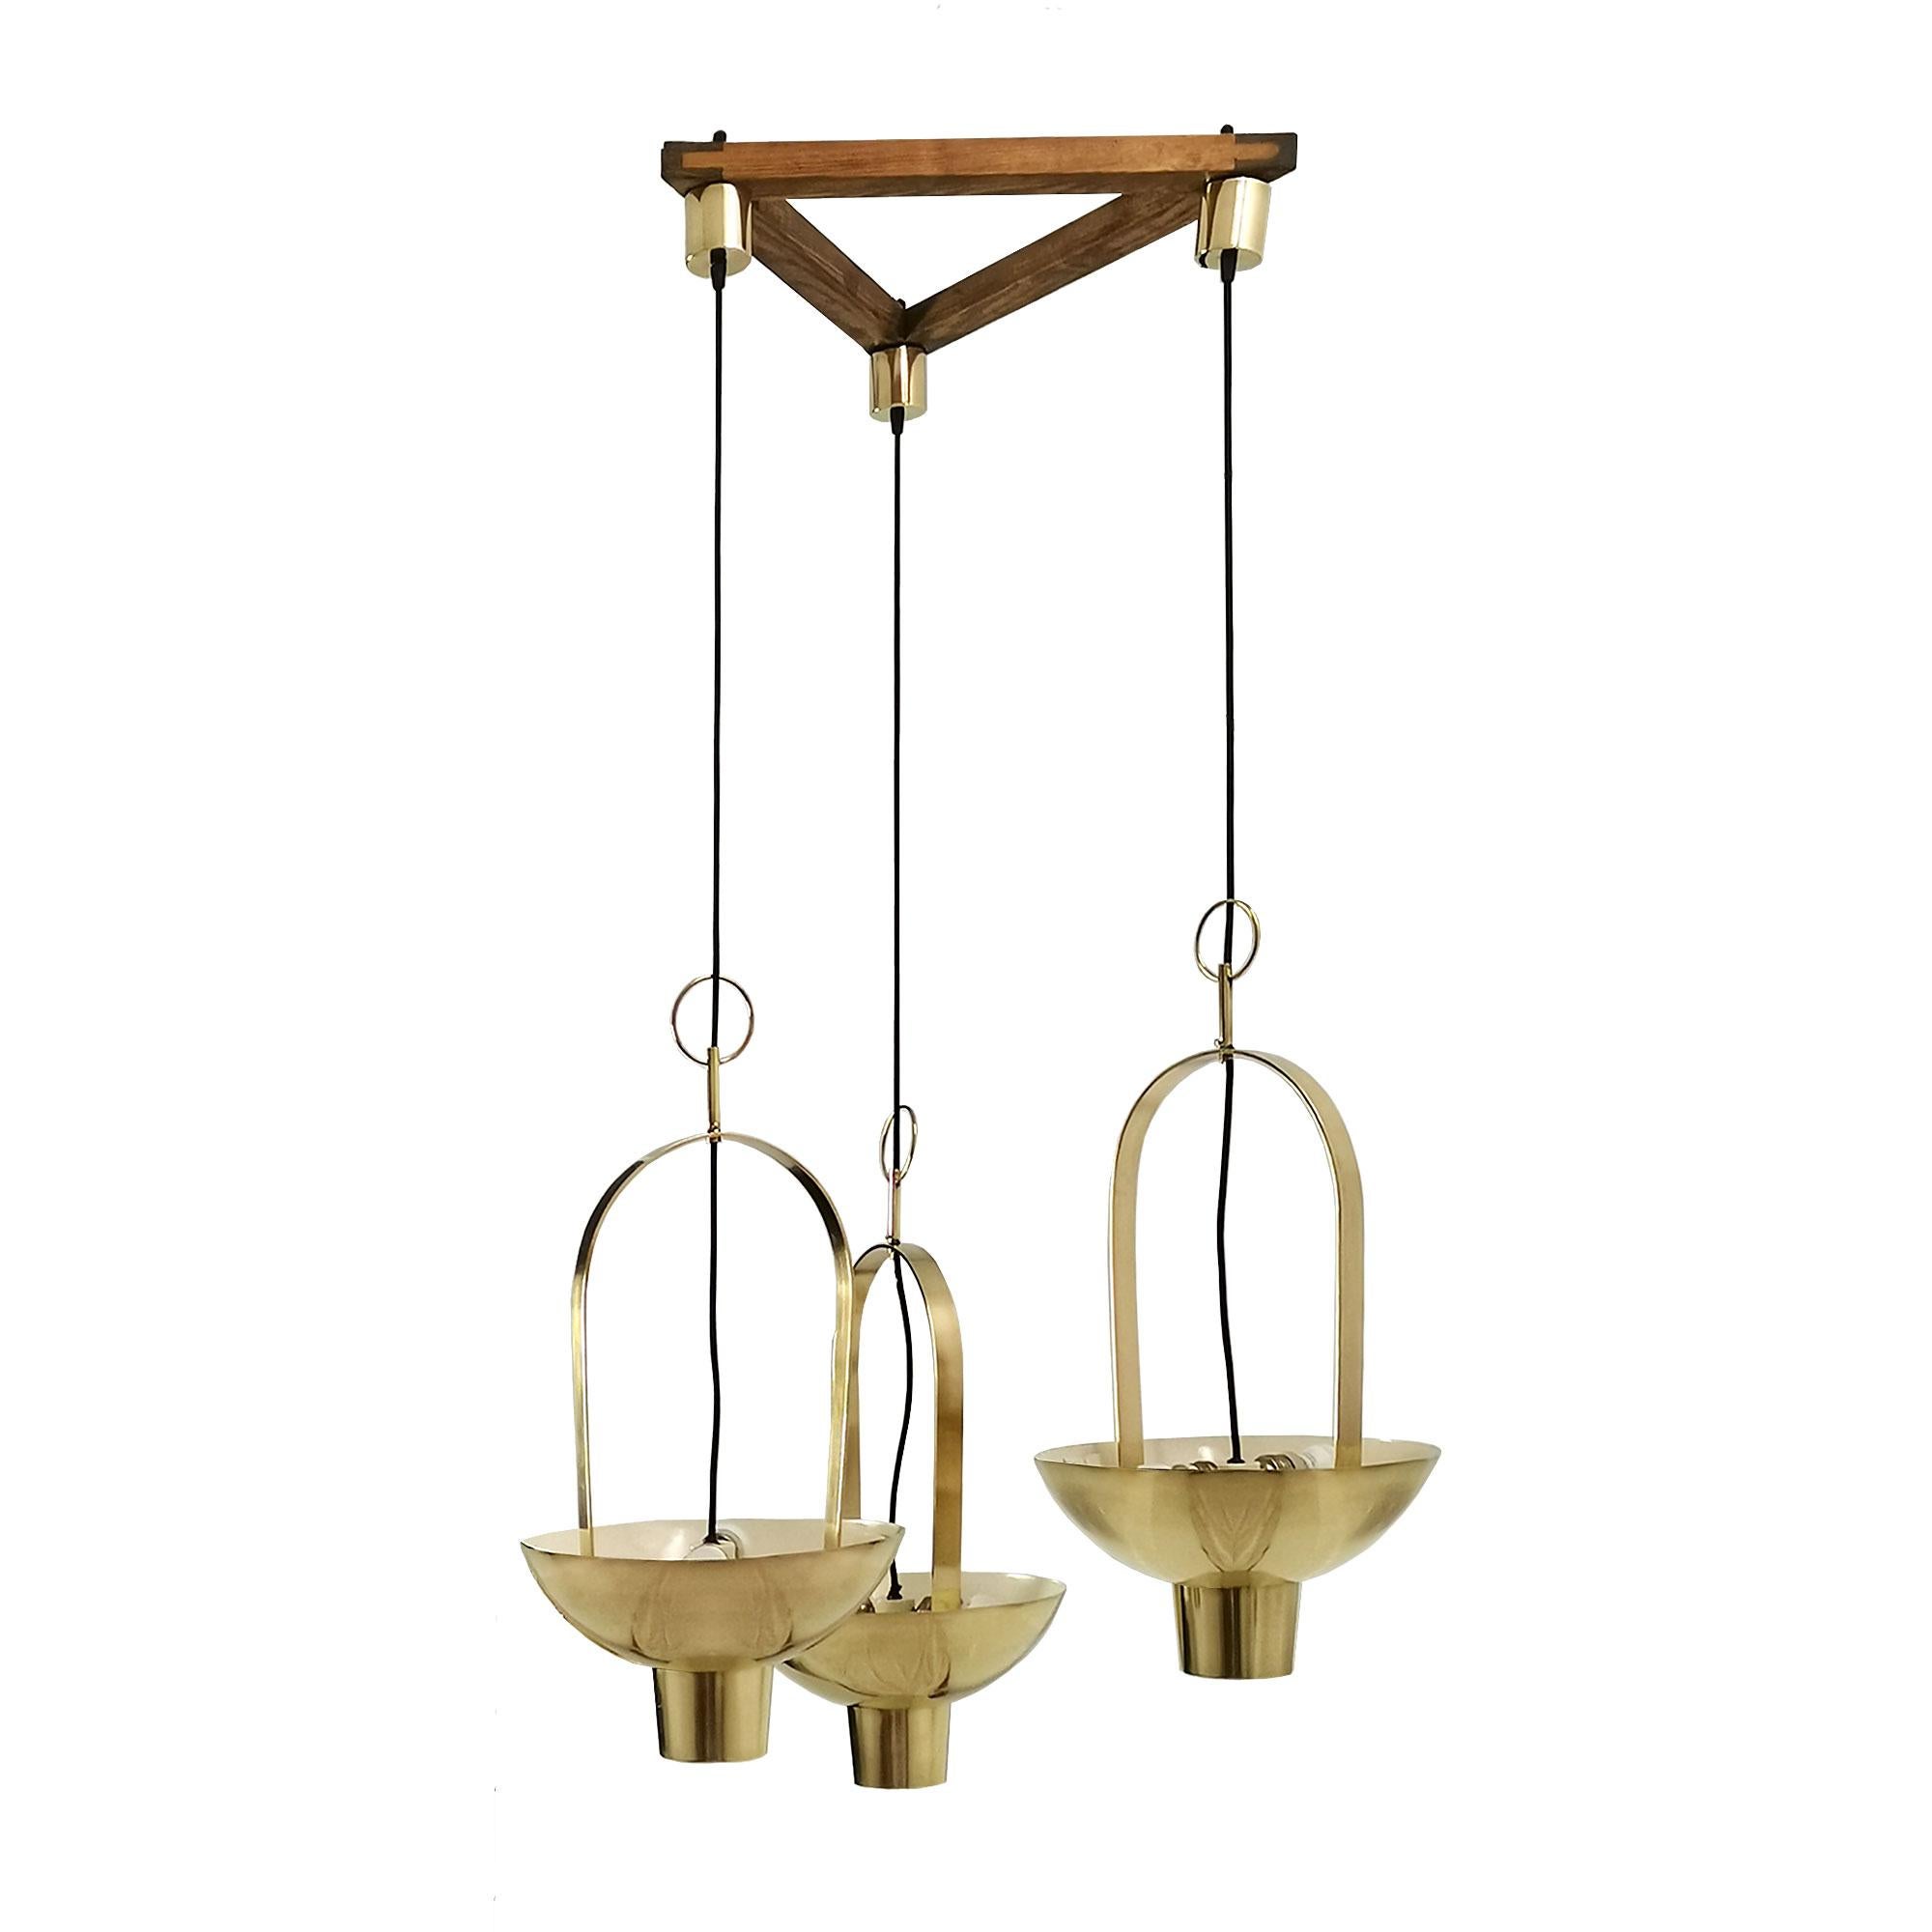 Composition of three lanterns assembled as a chandelier for a special order. Polished solid brass, ivory lacquered inside, three lights by lantern. Pine wood original structure.
Designed and made by Jordi Vilanova.

Spain, Barcelona c. 1960.